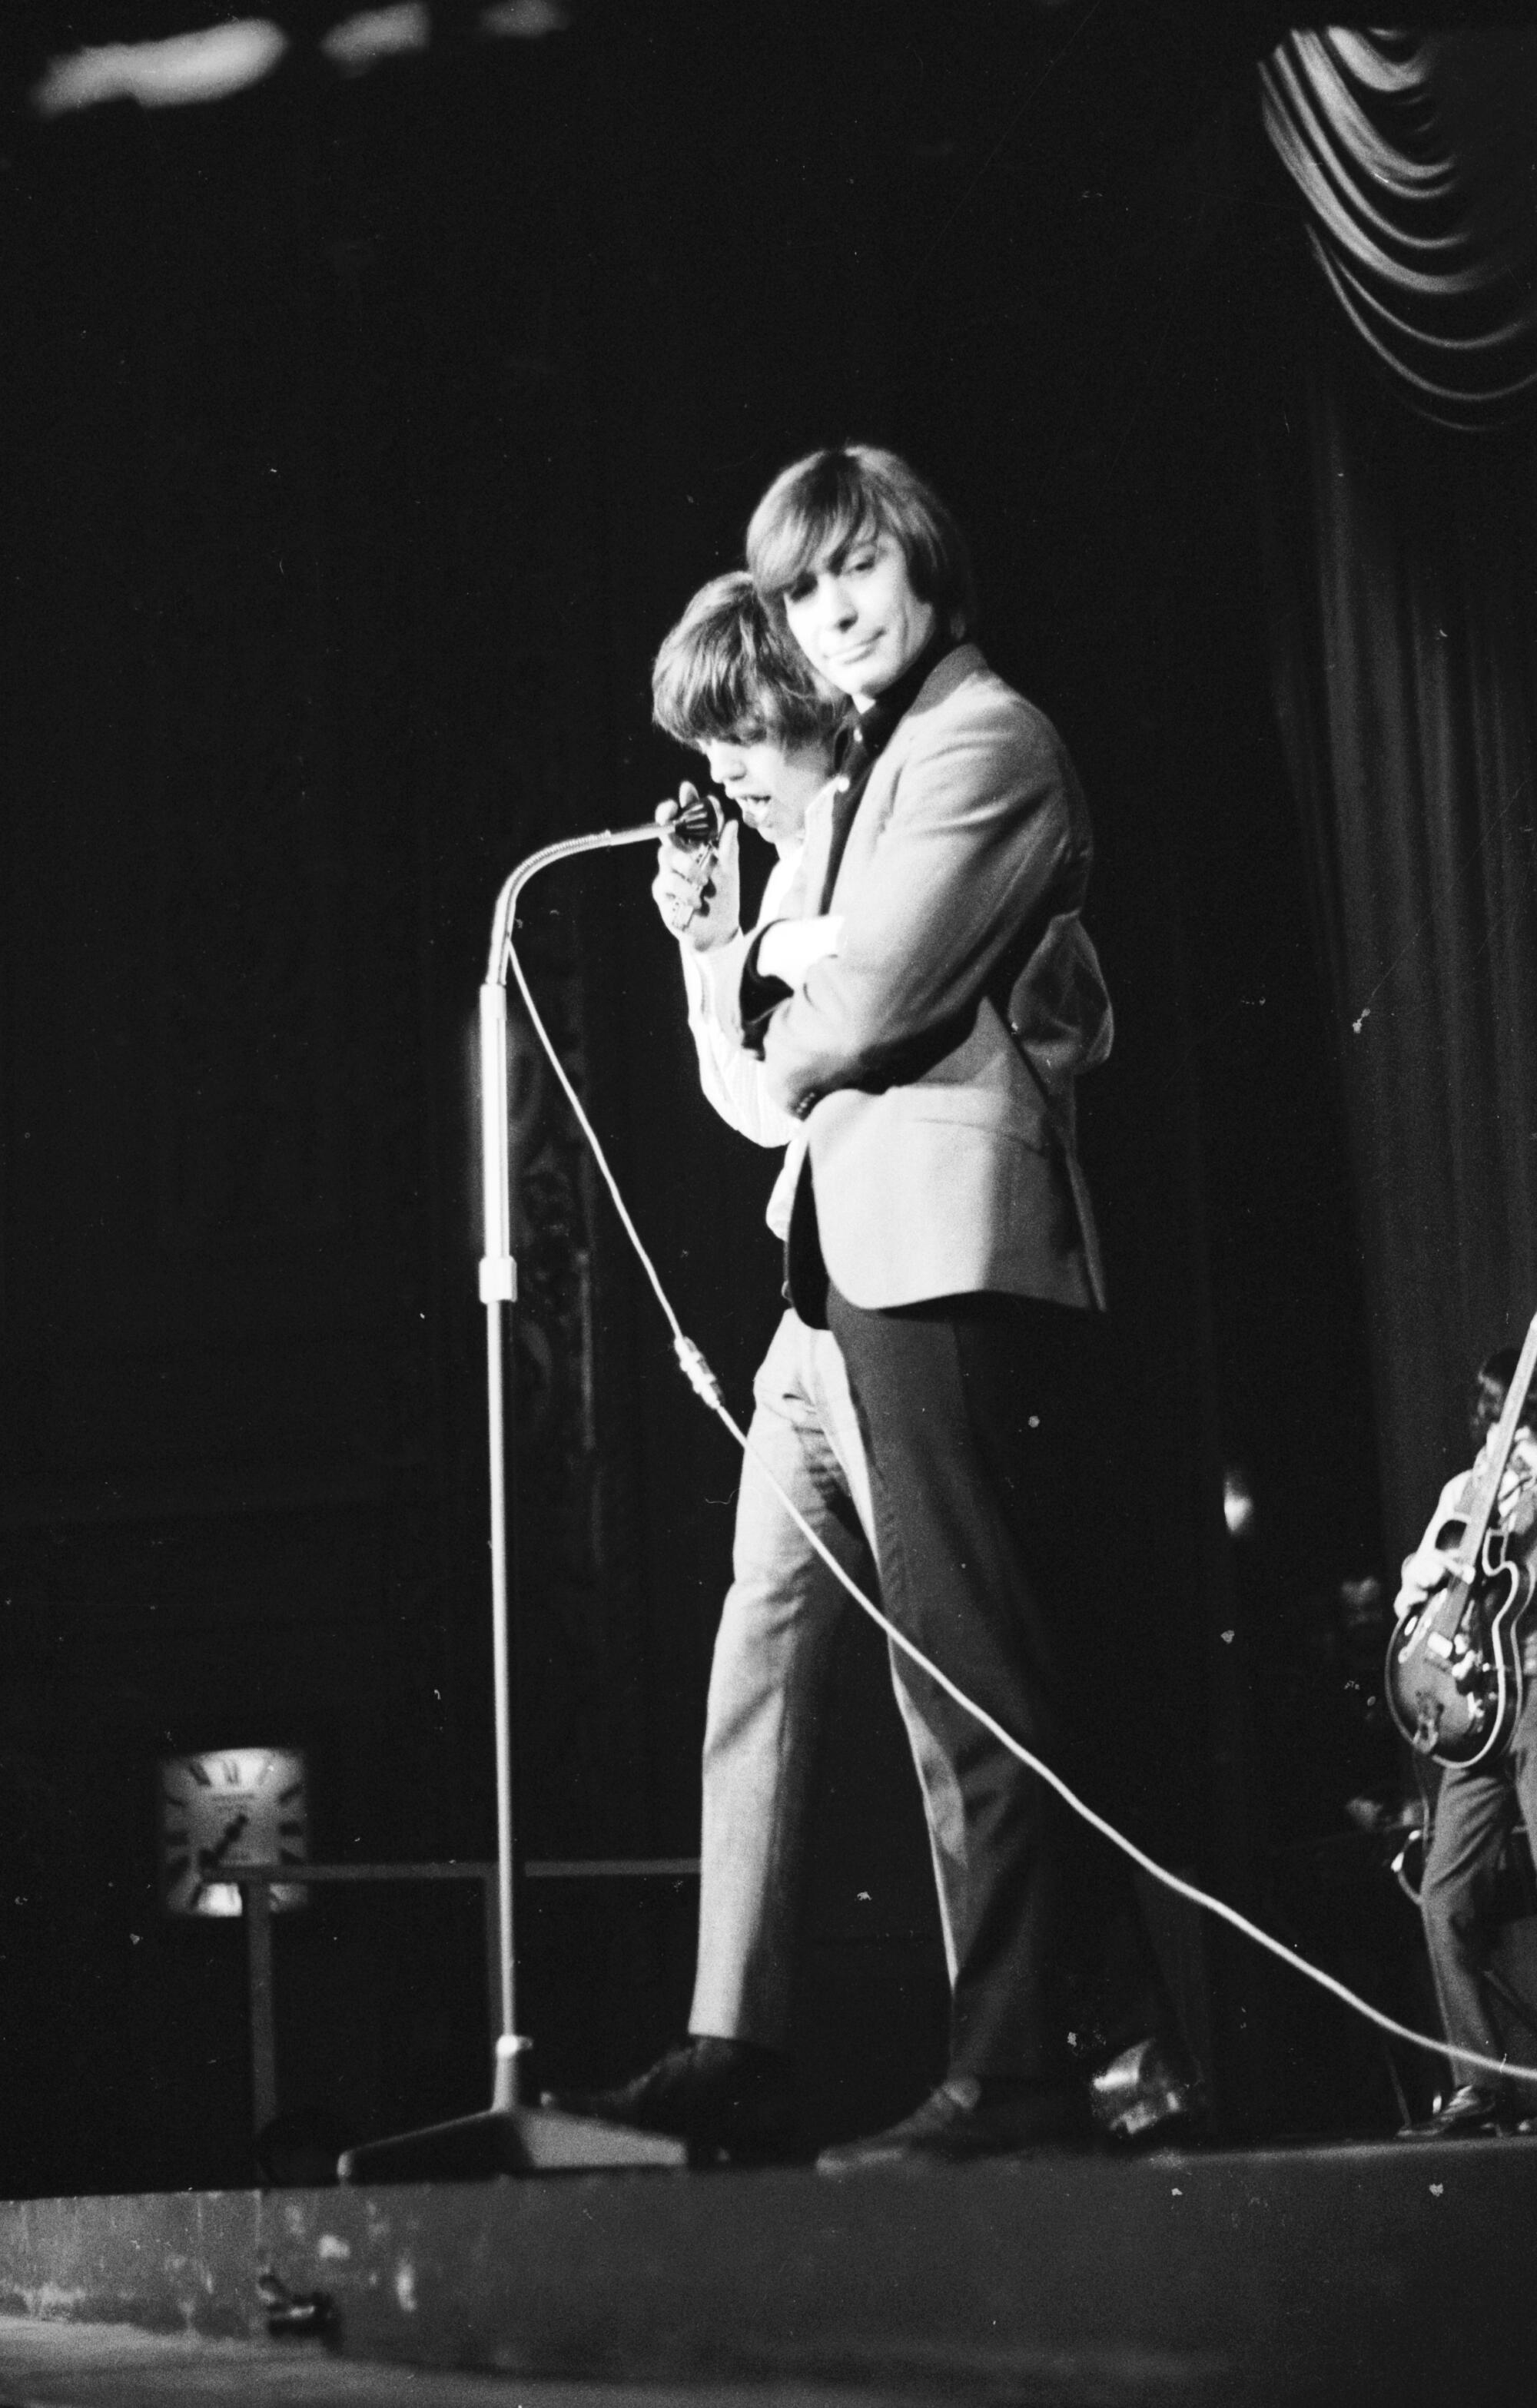 January 1965: Singer Mick Jagger and drummer Charlie Watts stand at a microphone.